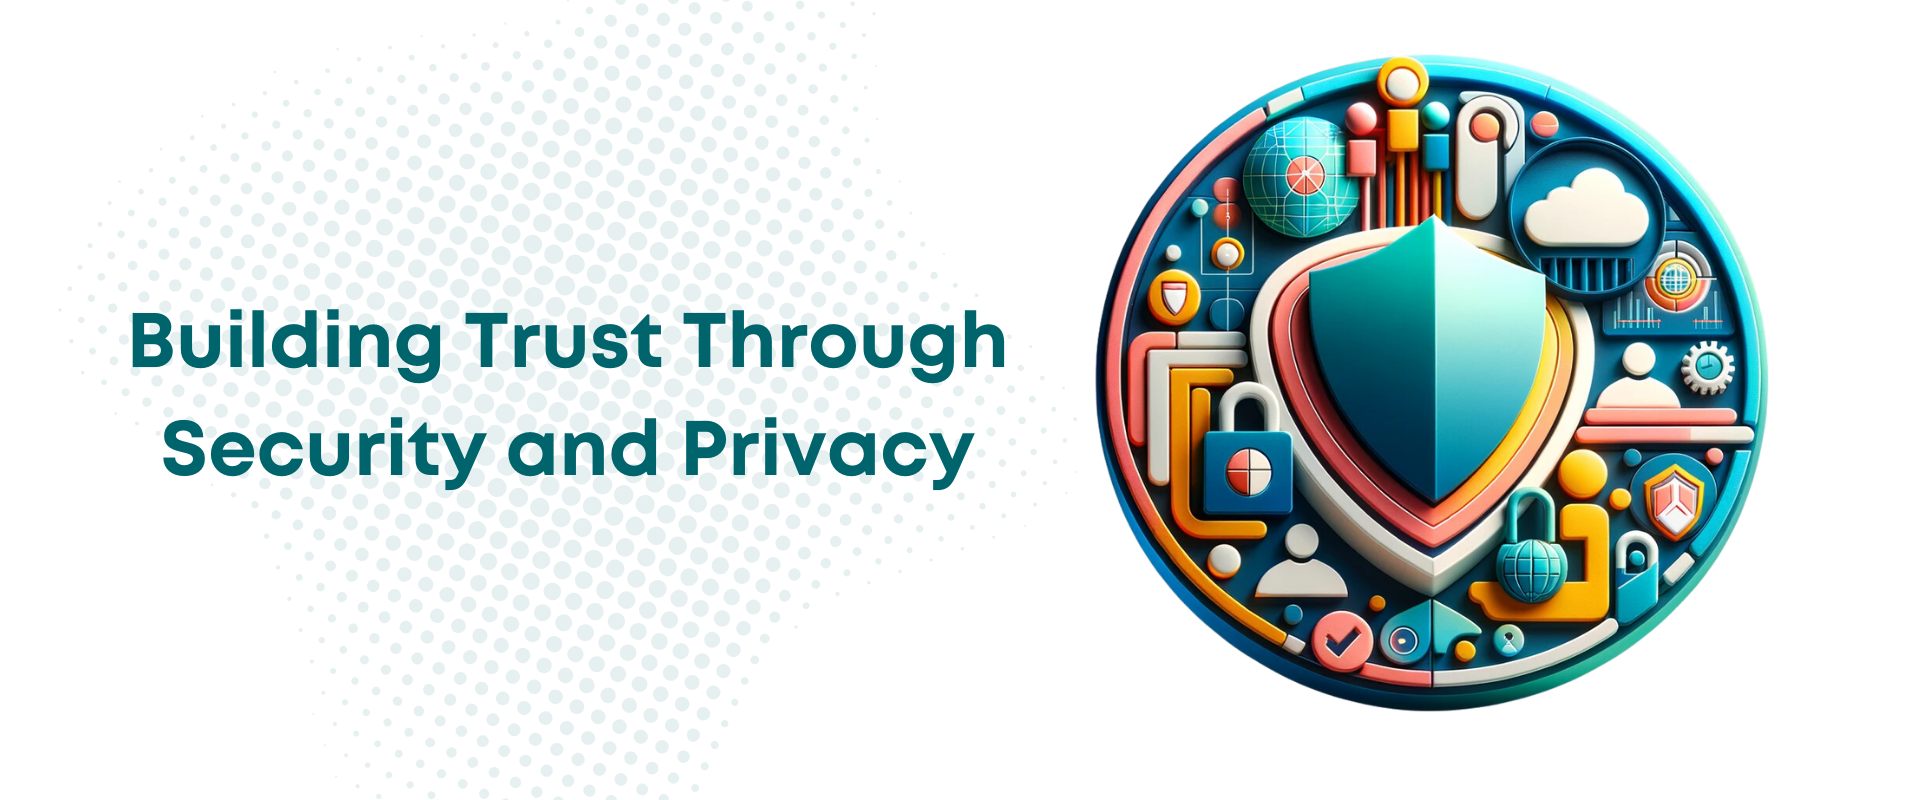 Building Trust through Security and Privacy